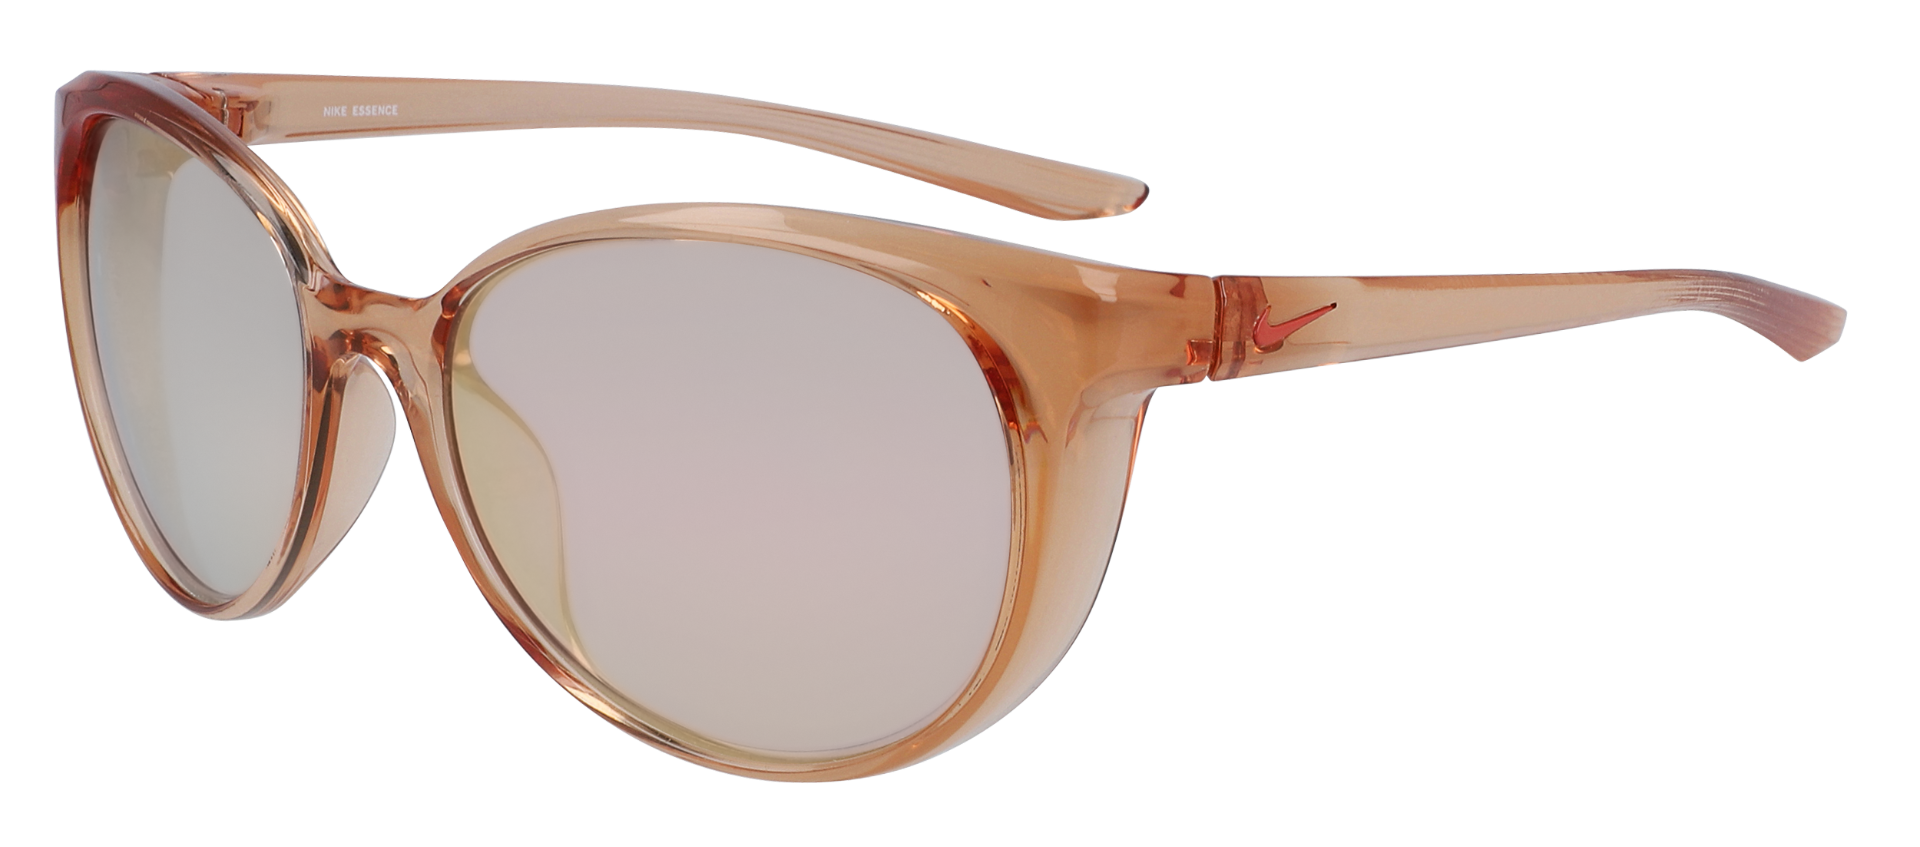 Nike Essence women's sunglasses in light coral with light rose gold mirror lenses.